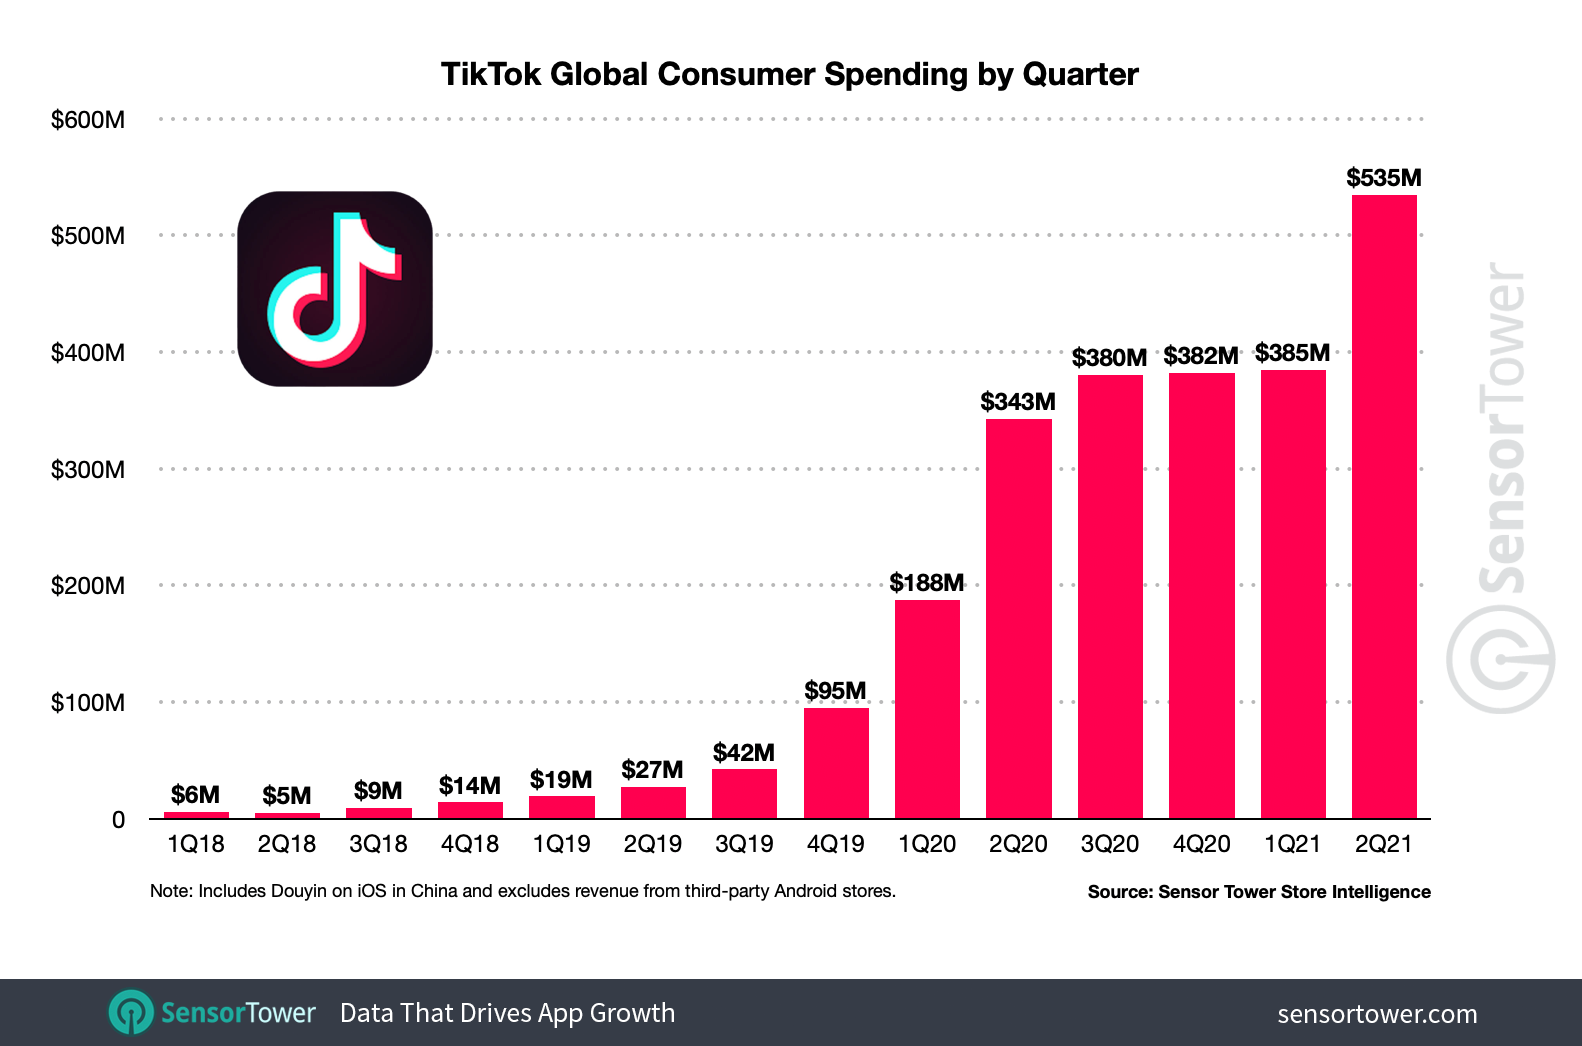 TikTok Claims the App Now Tops 1 Billion Daily Active Users